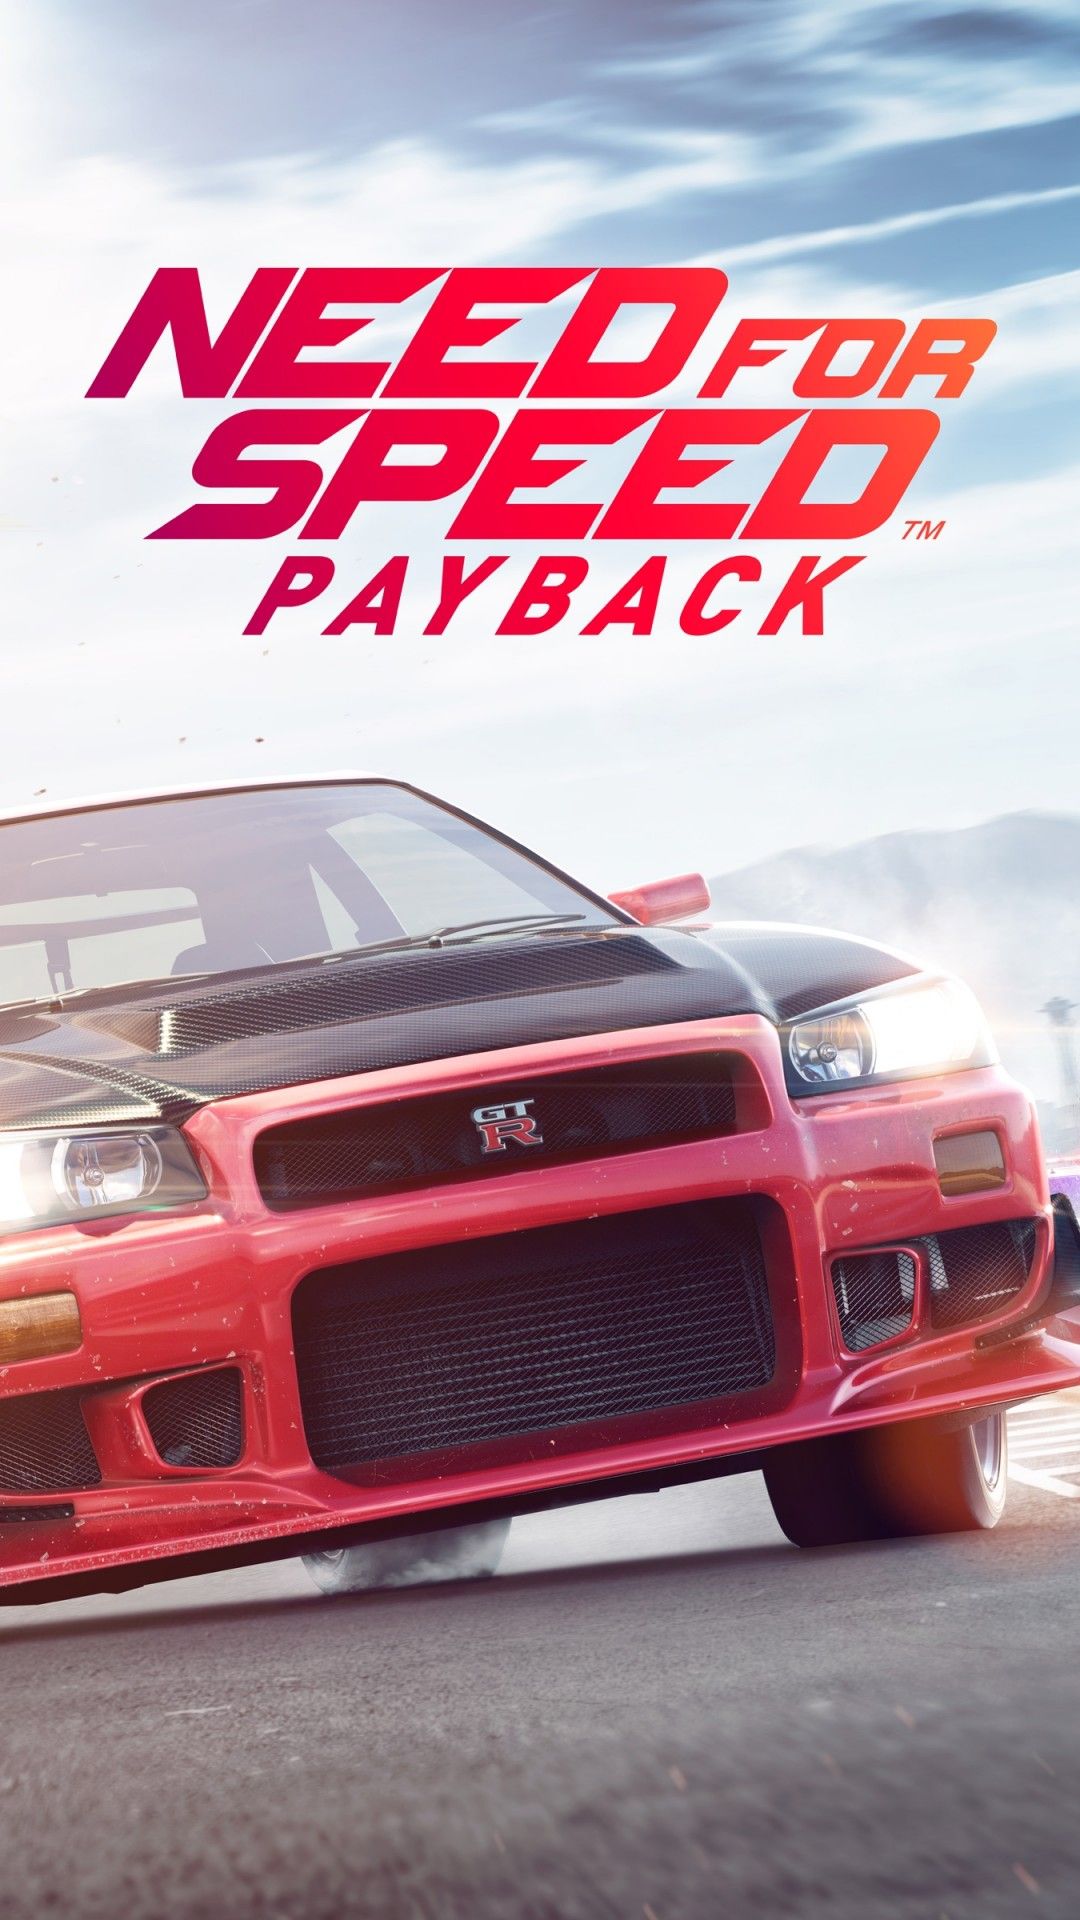 Need For Speed Payback Iphone12 スマホ壁紙 待受画像ギャラリー